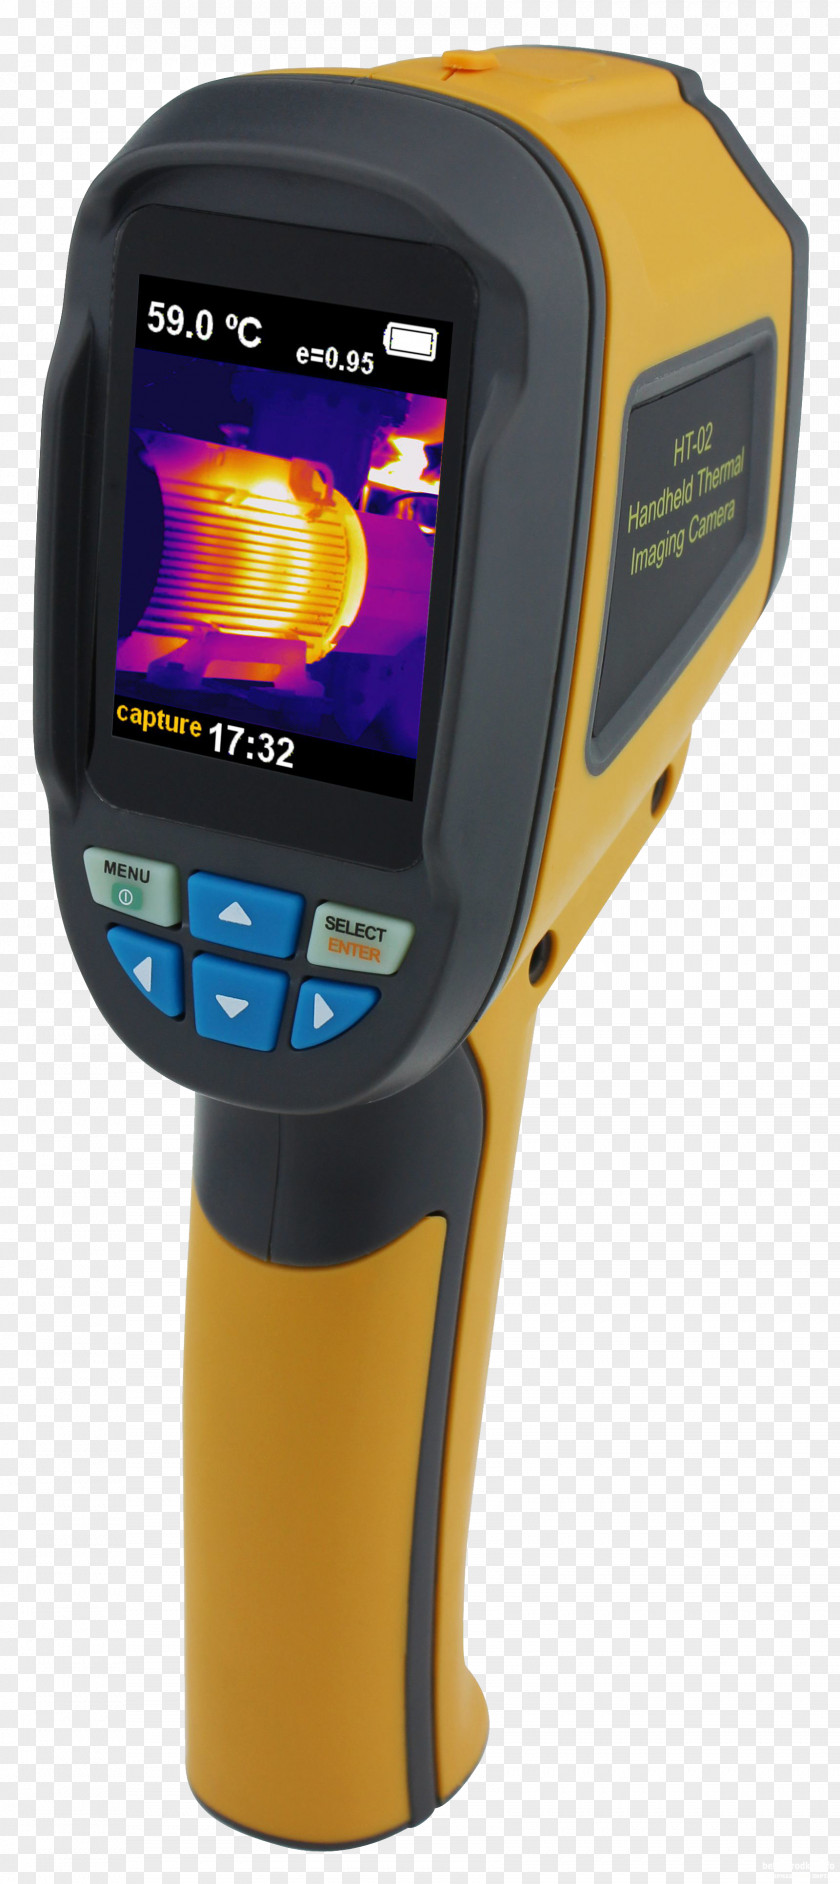 Camera Thermographic Infrared Thermal Imaging Cameras Thermography PNG